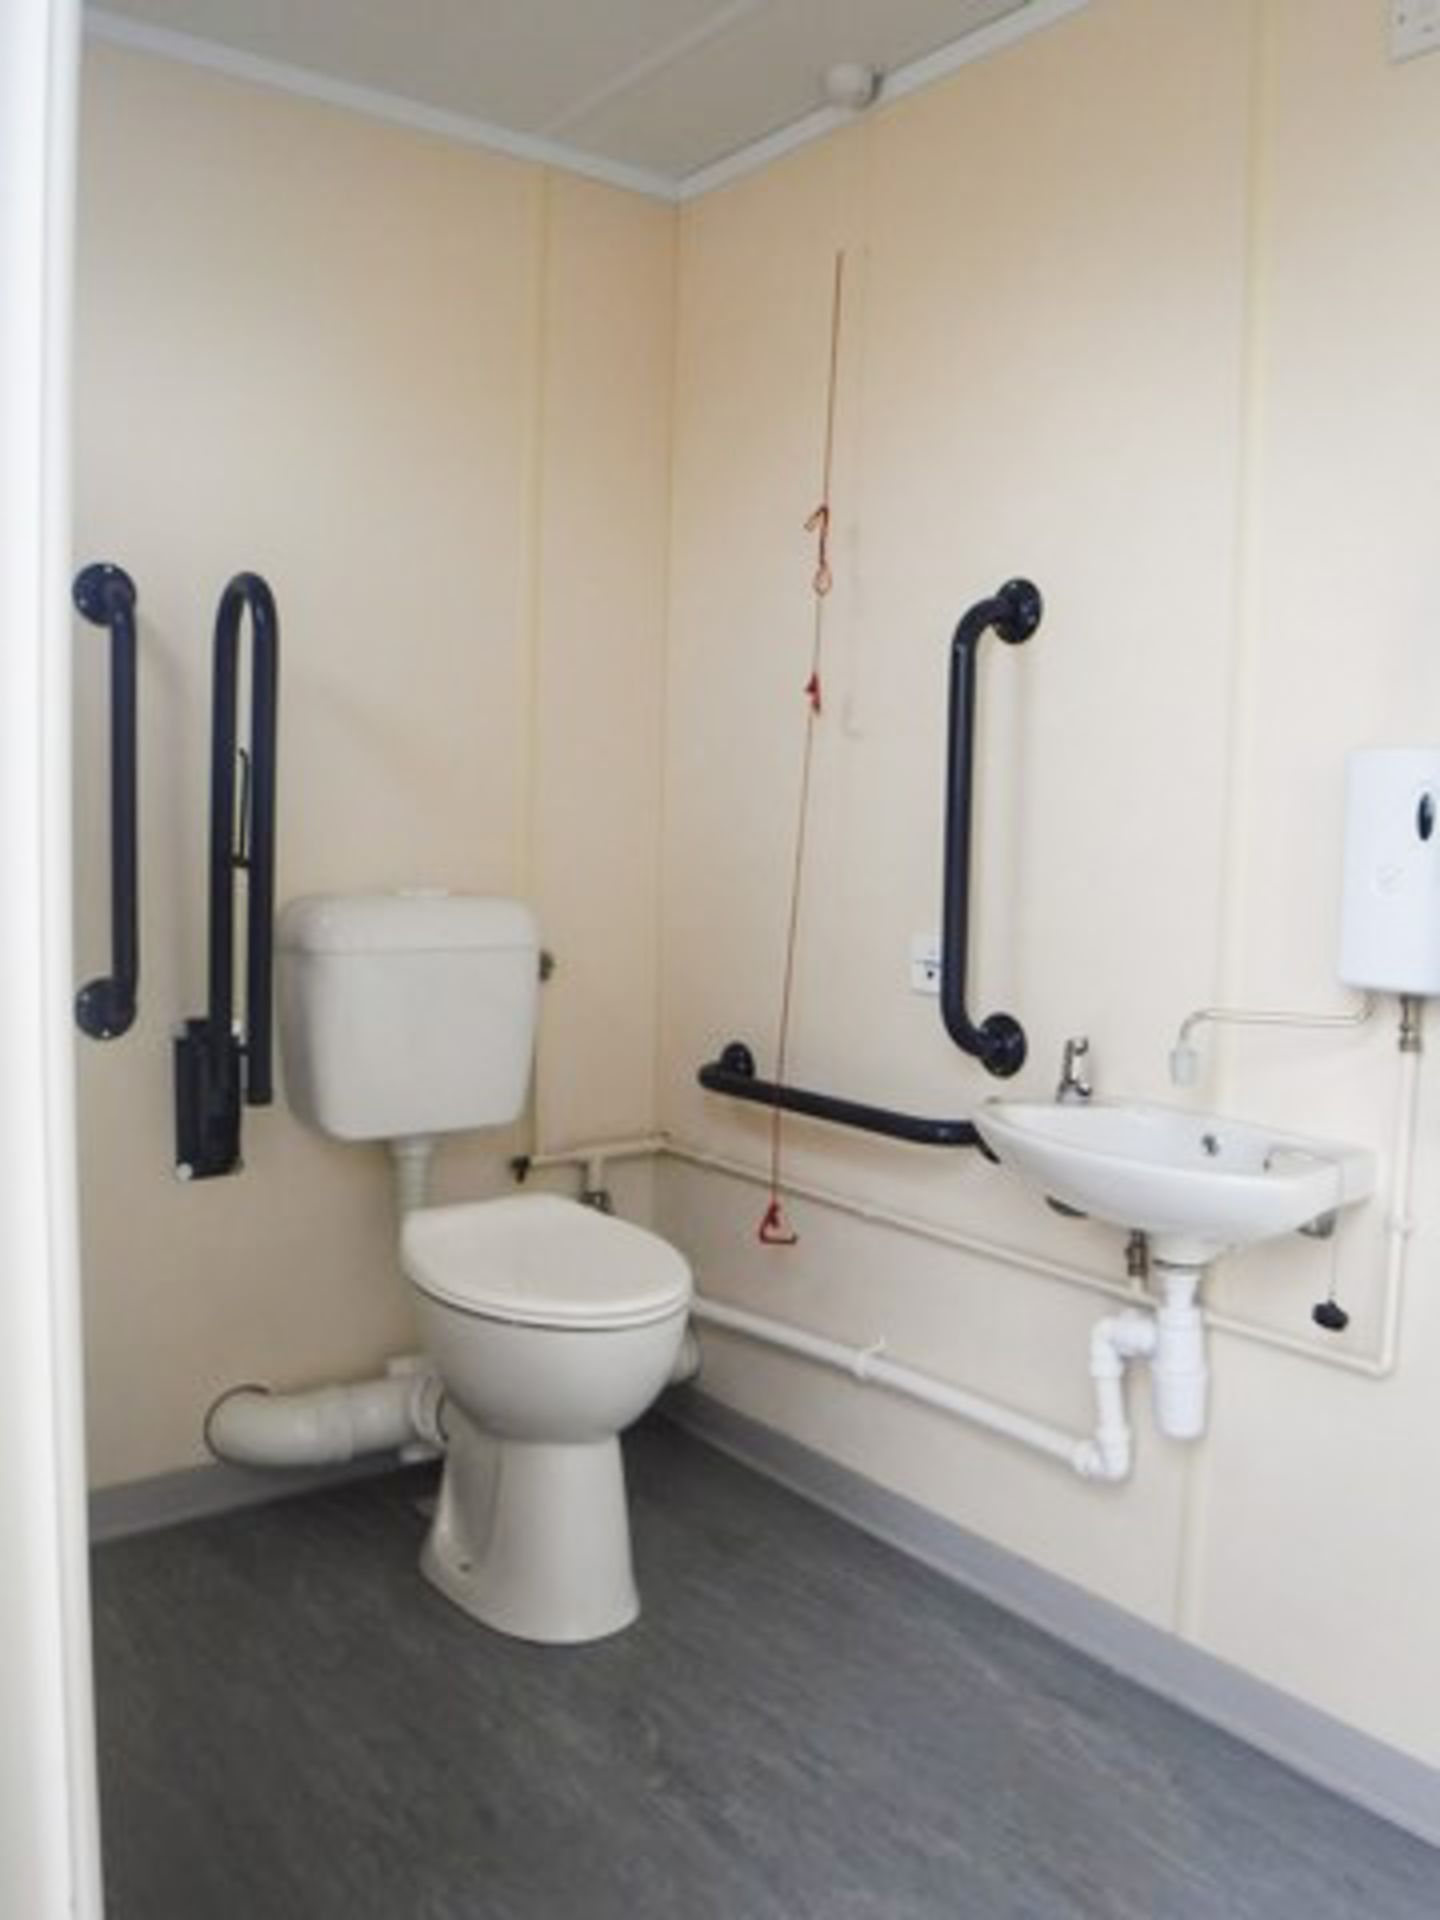 40 X 10 TOILET BLOCK, C/W 10 CUBICALS, 10 URINALS, 9 SINKS, WATER HEATERS TEMP CONTROLLED ANTI-FREEZ - Image 3 of 9